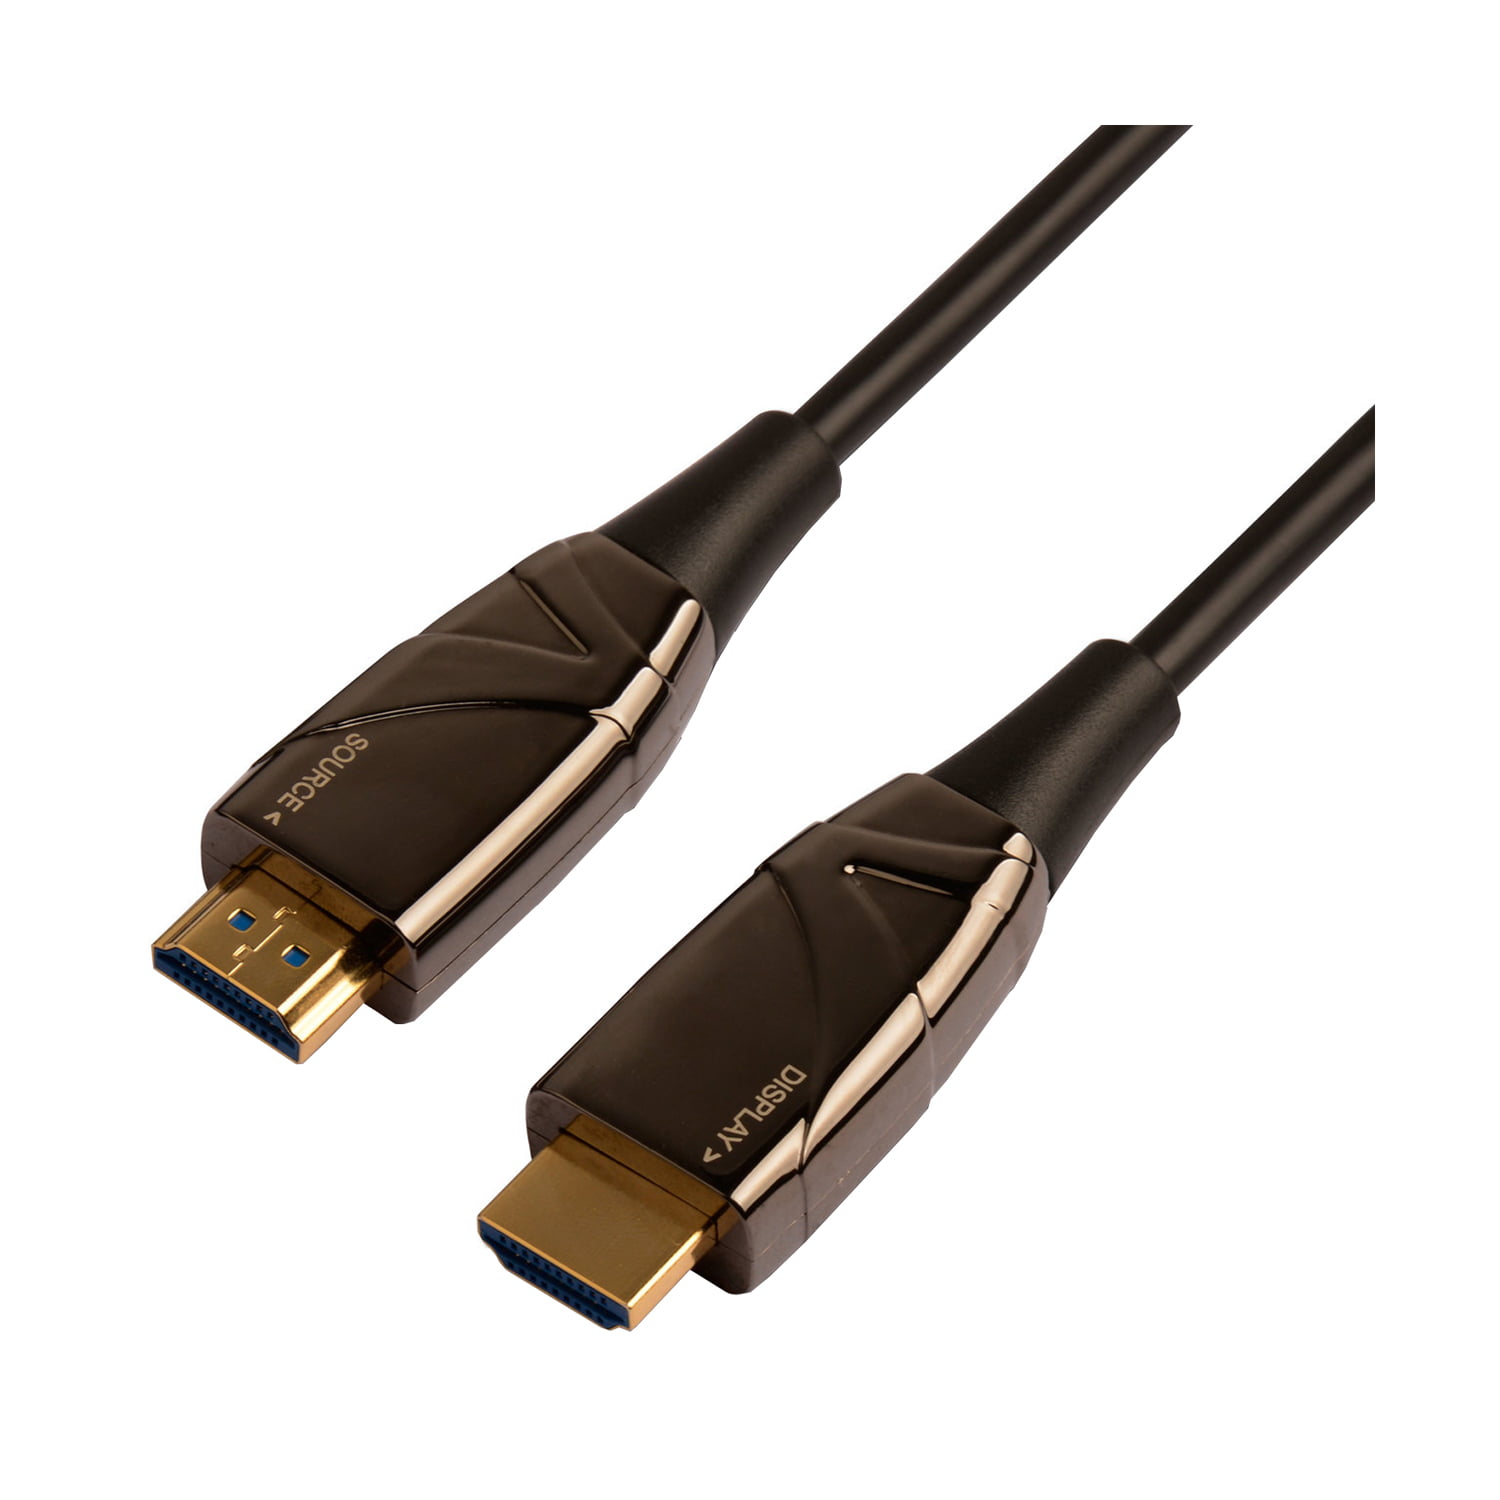 8K Long HDMI Fiber Optic Cable 33Feet/10m, 8K@60hz, 4K@120hz, HDMI 2.1  Cable 33FT, 48Gbps Ultra High Speed, Support HDR, eARC, Compatible for PC